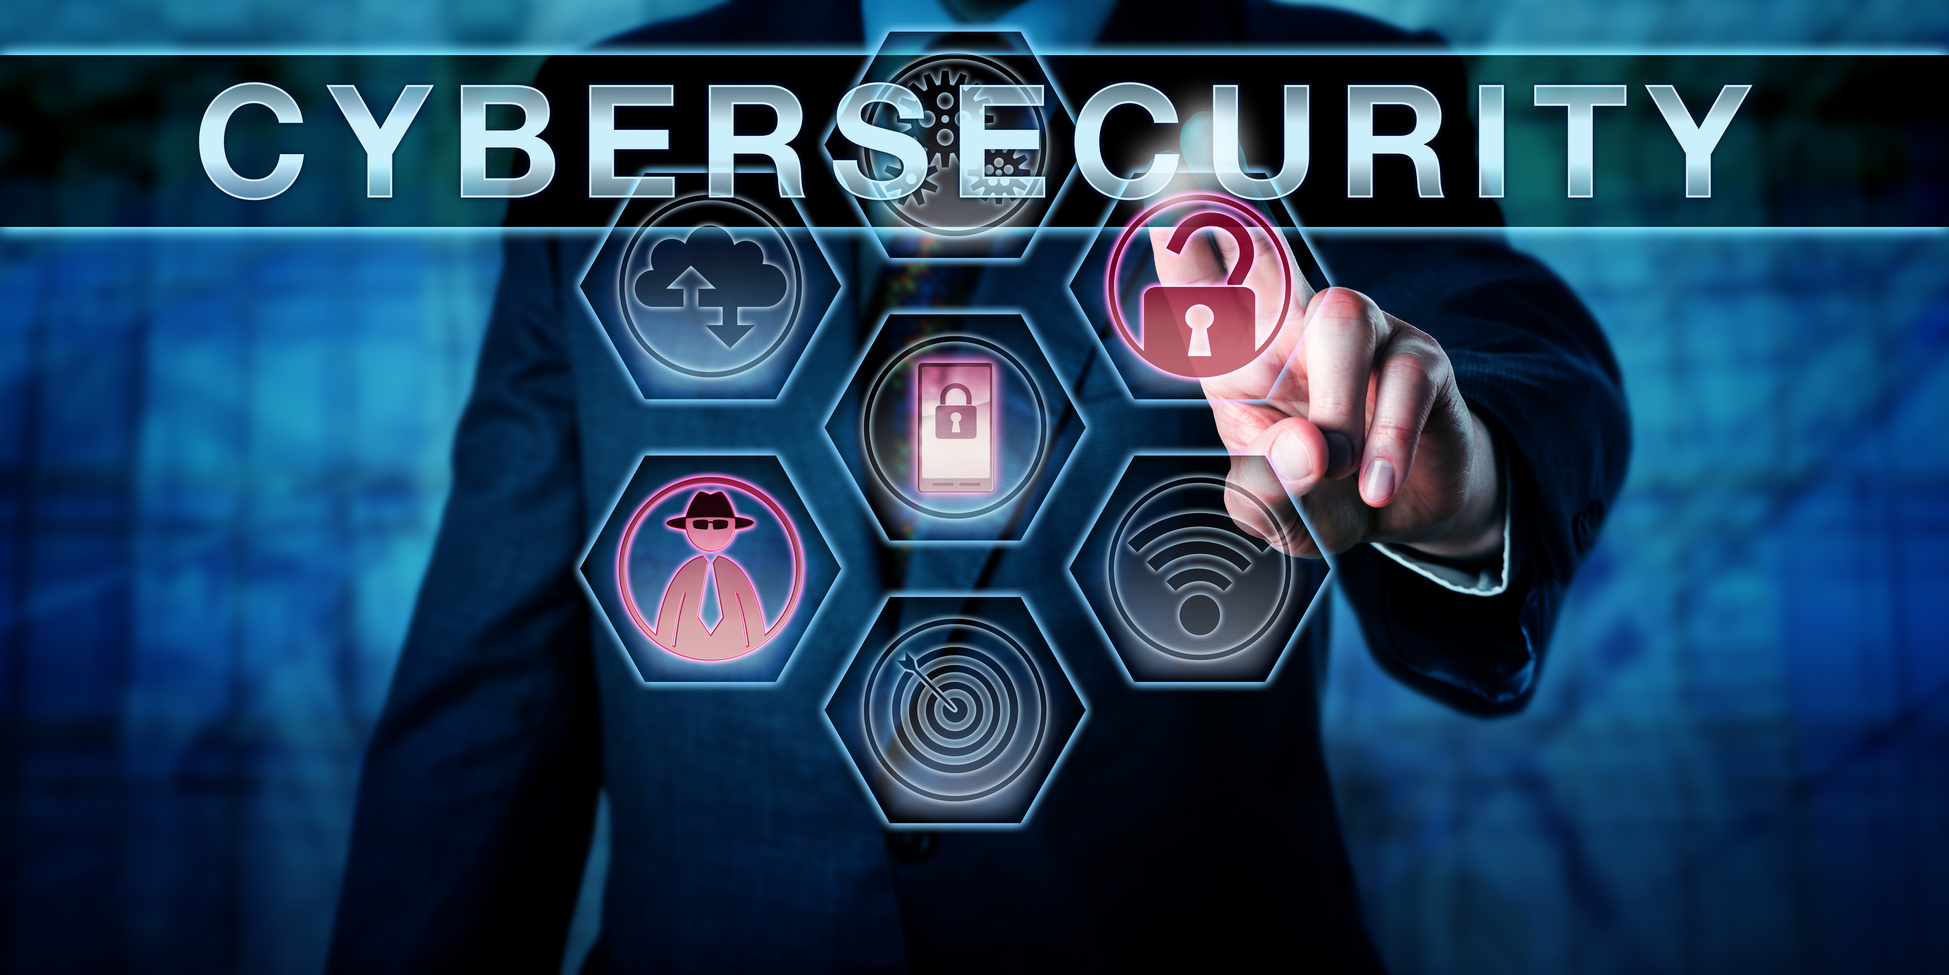 How To Become A Certified Cyber Security Professional